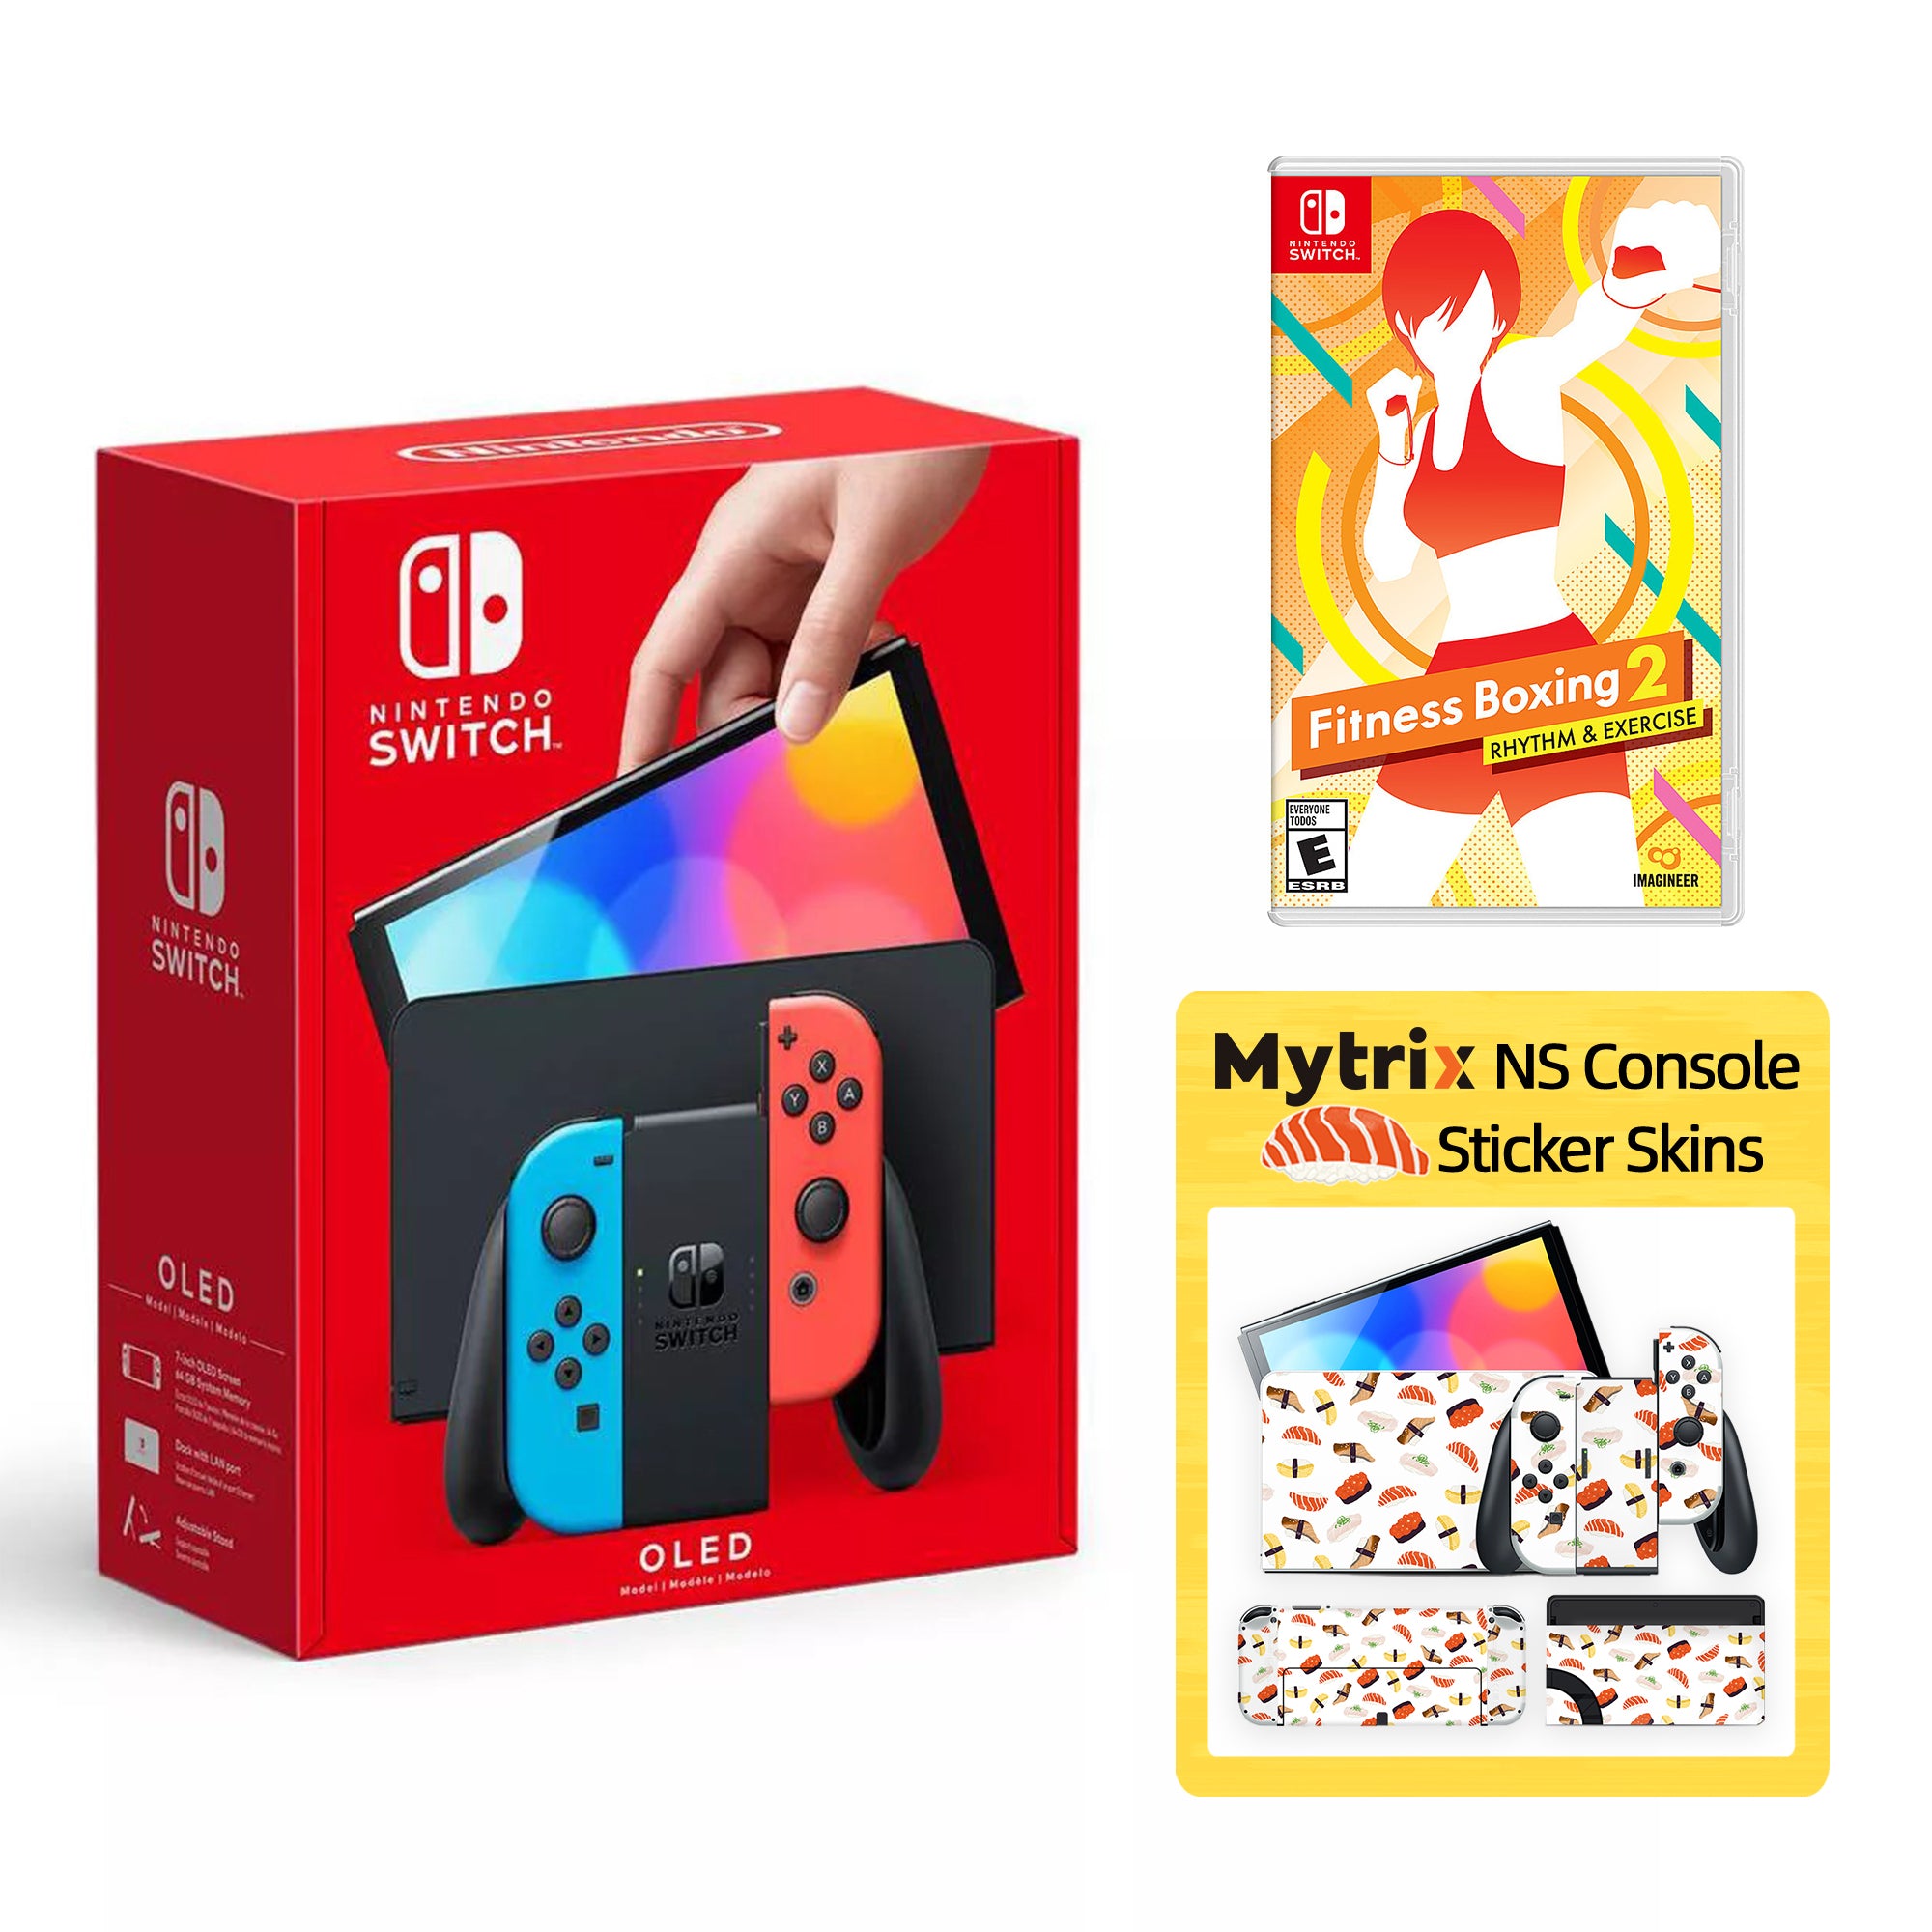 2022 New Nintendo Switch OLED Model Neon Red Blue with Fitness Boxing 2: Rhythm & Exercise and Mytrix Full Body Skin Sticker for NS OLED Console, Dock and Joycons - Sushi Set